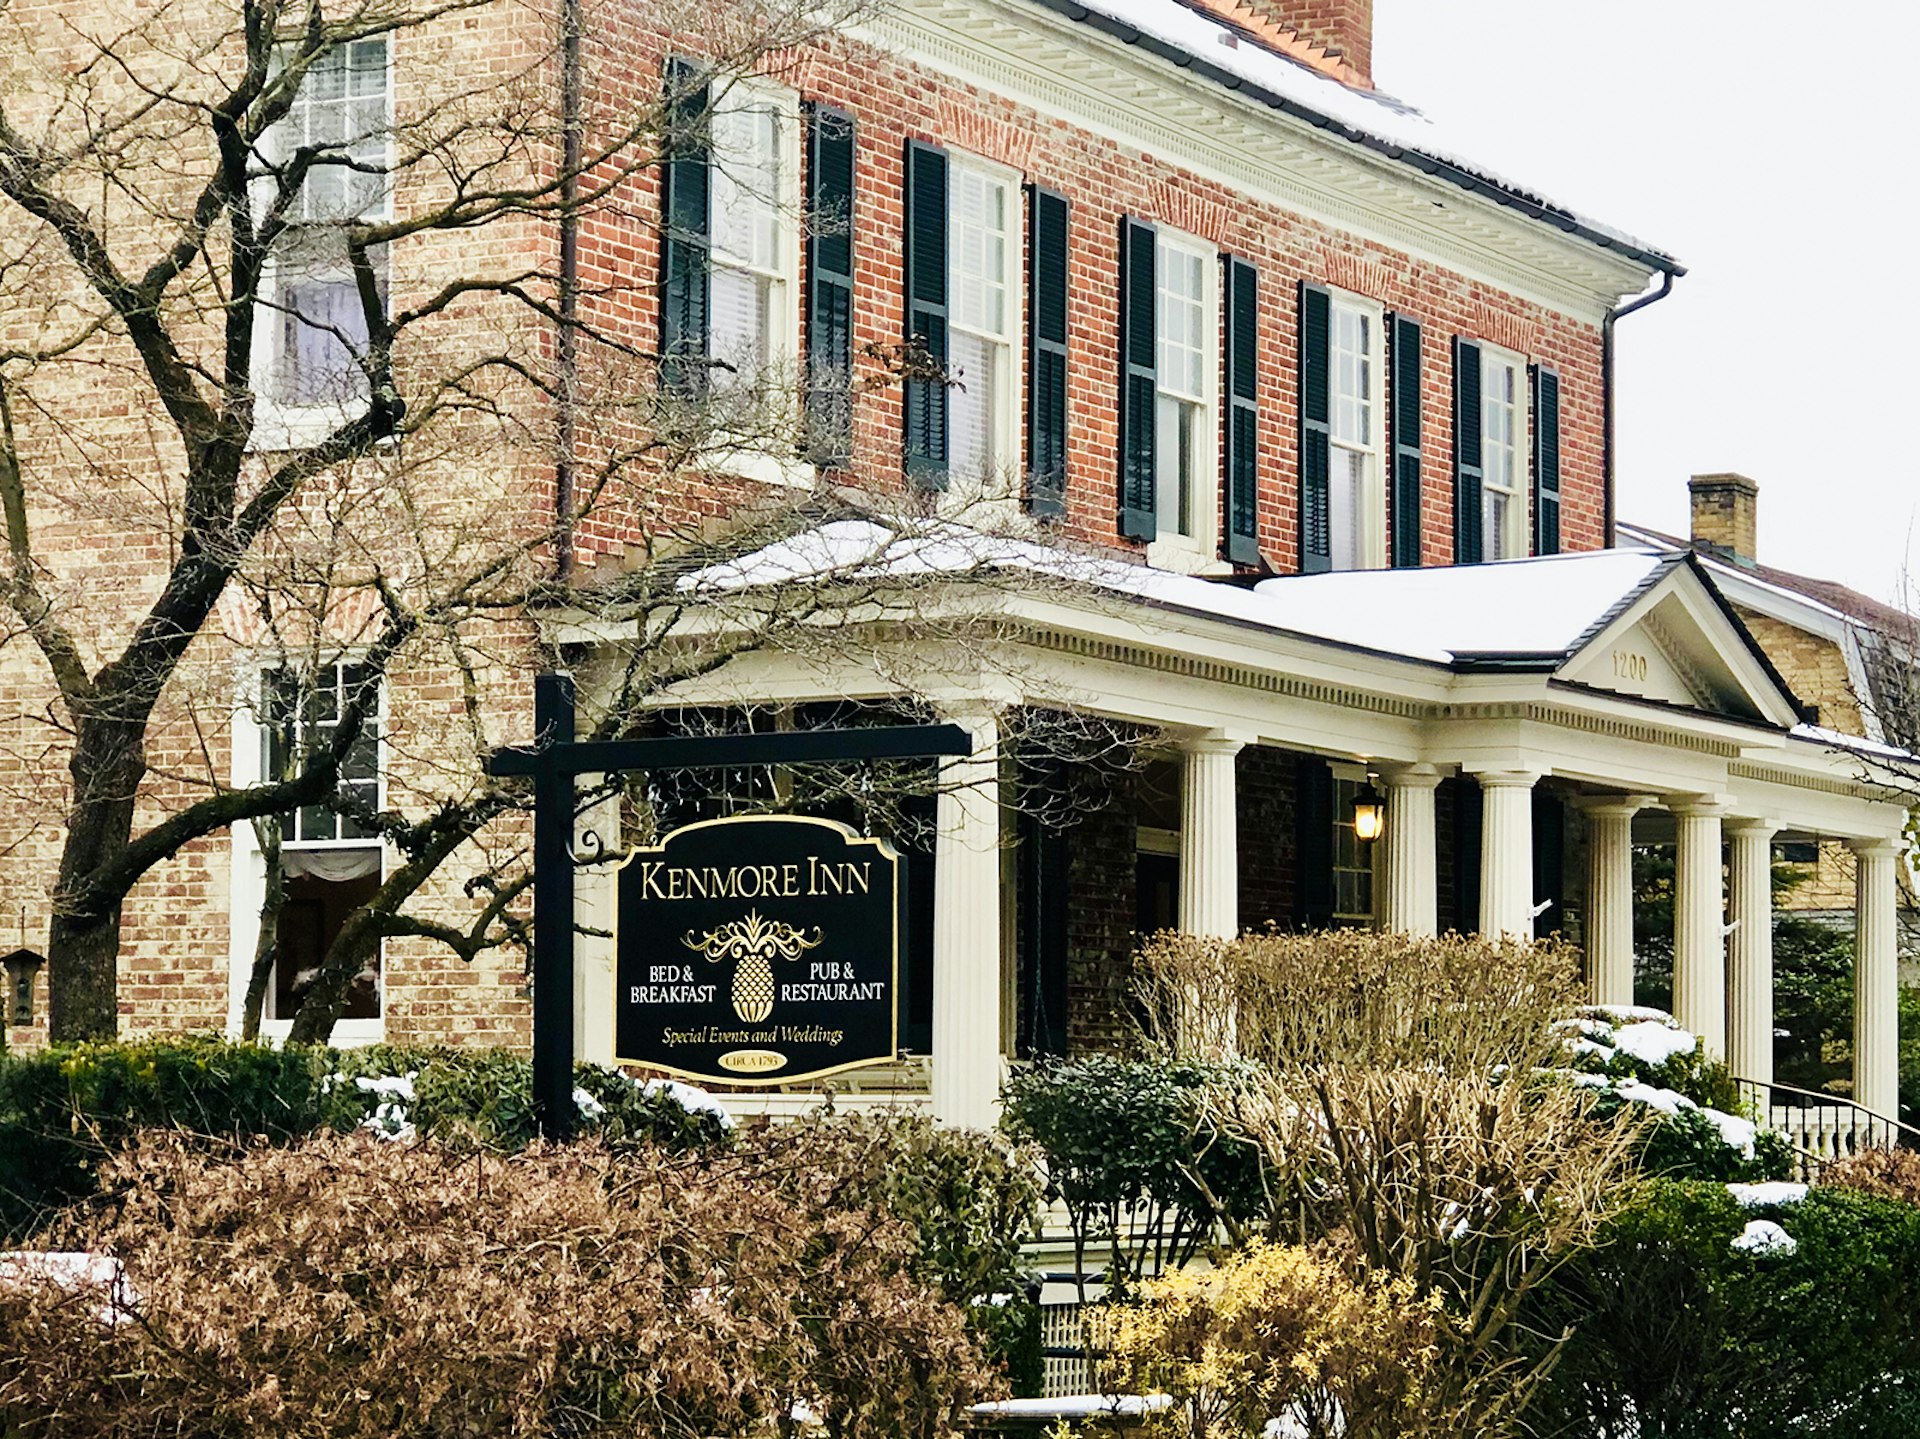 Late 18th-century Federal style home-turned-inn, with a light dusting of snow on the portico